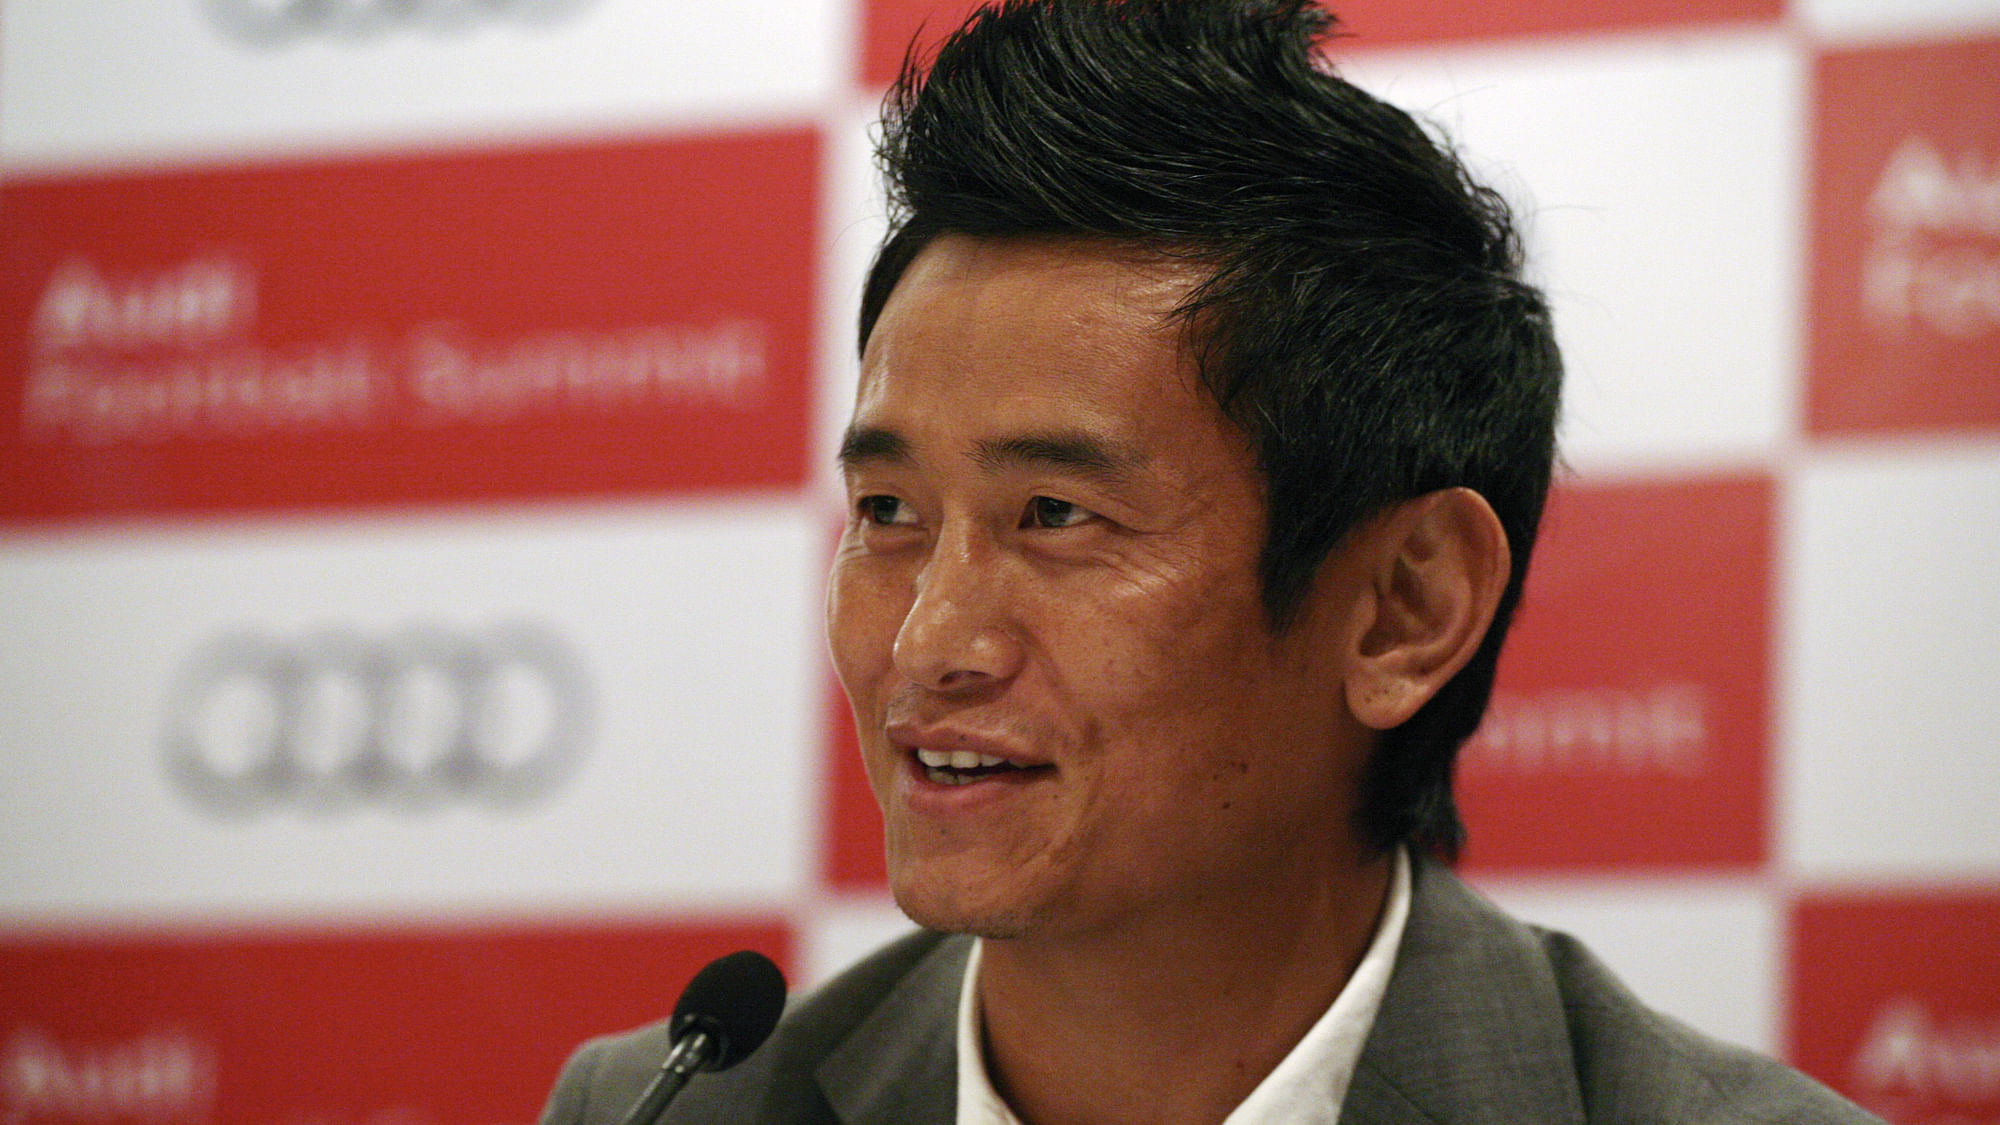 PK Banerjee’s pep talk saw an inspired Bhaichung Bhutia play one of his greatest matches.